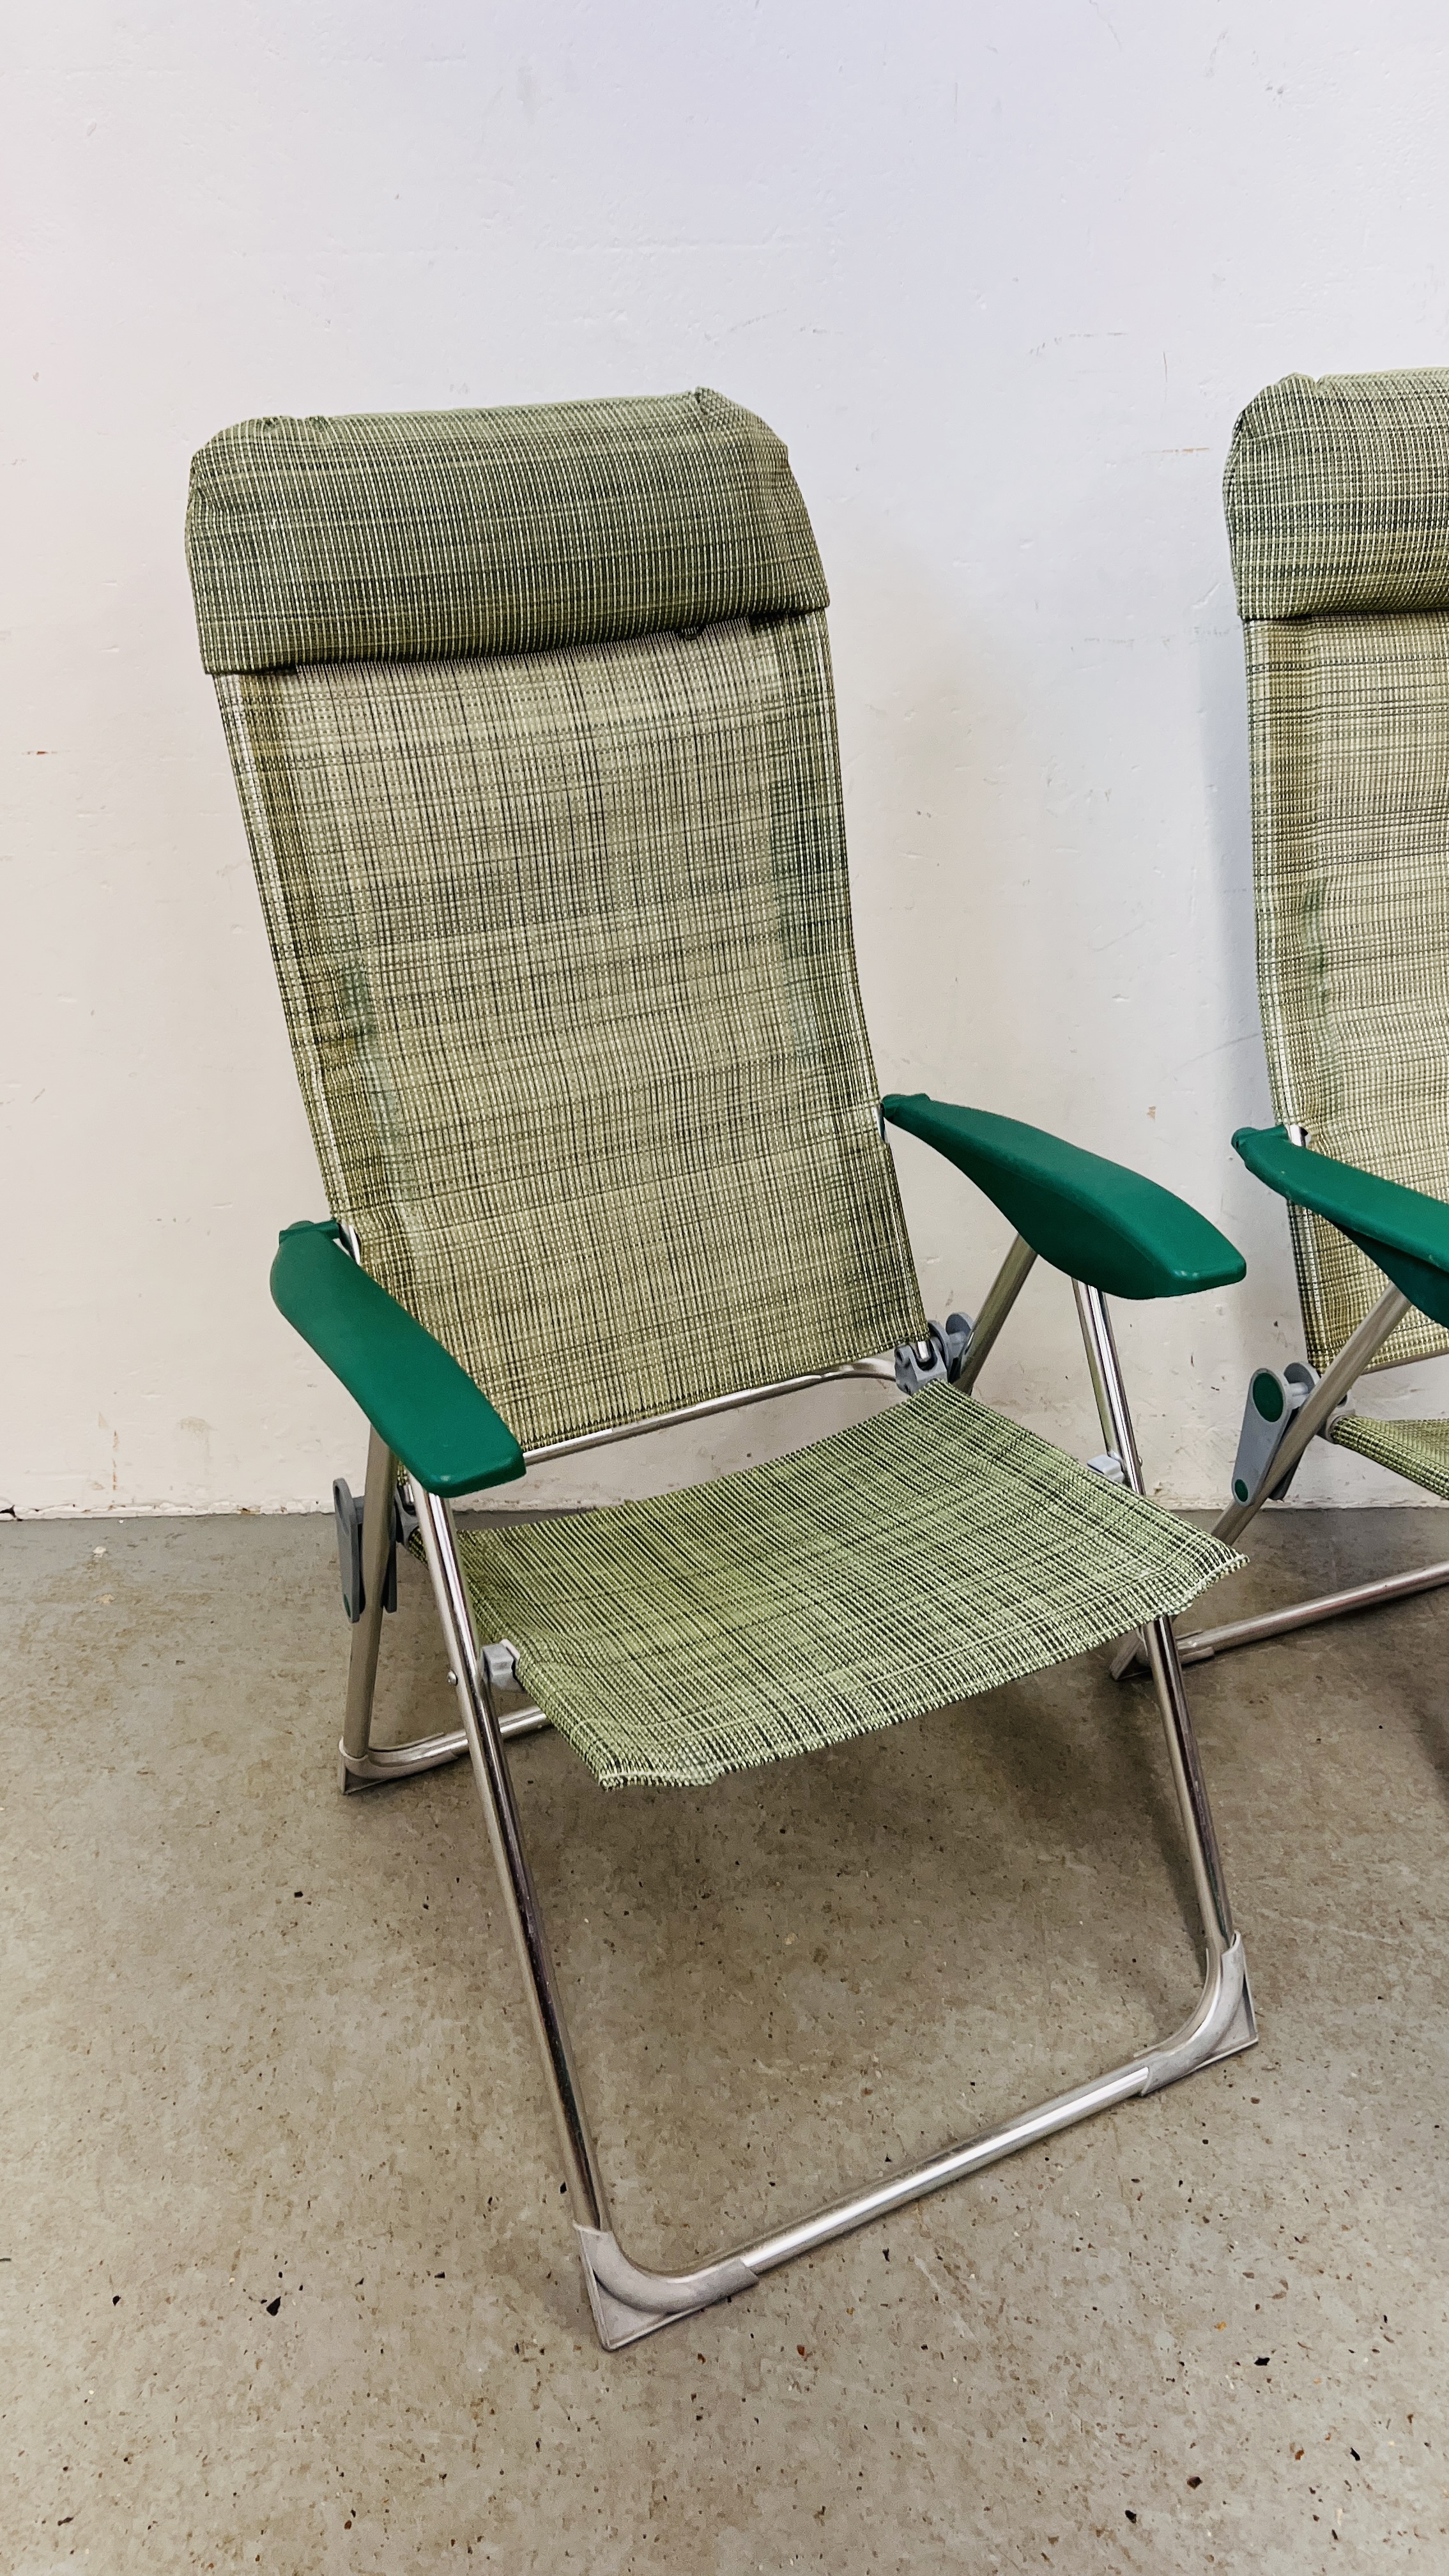 A PAIR OF ALUMINIUM FRAMED FOLDING SUN CHAIRS WITH MATCHING FOLDING FOOT RESTS AND GARDEN PARASOL. - Image 9 of 10